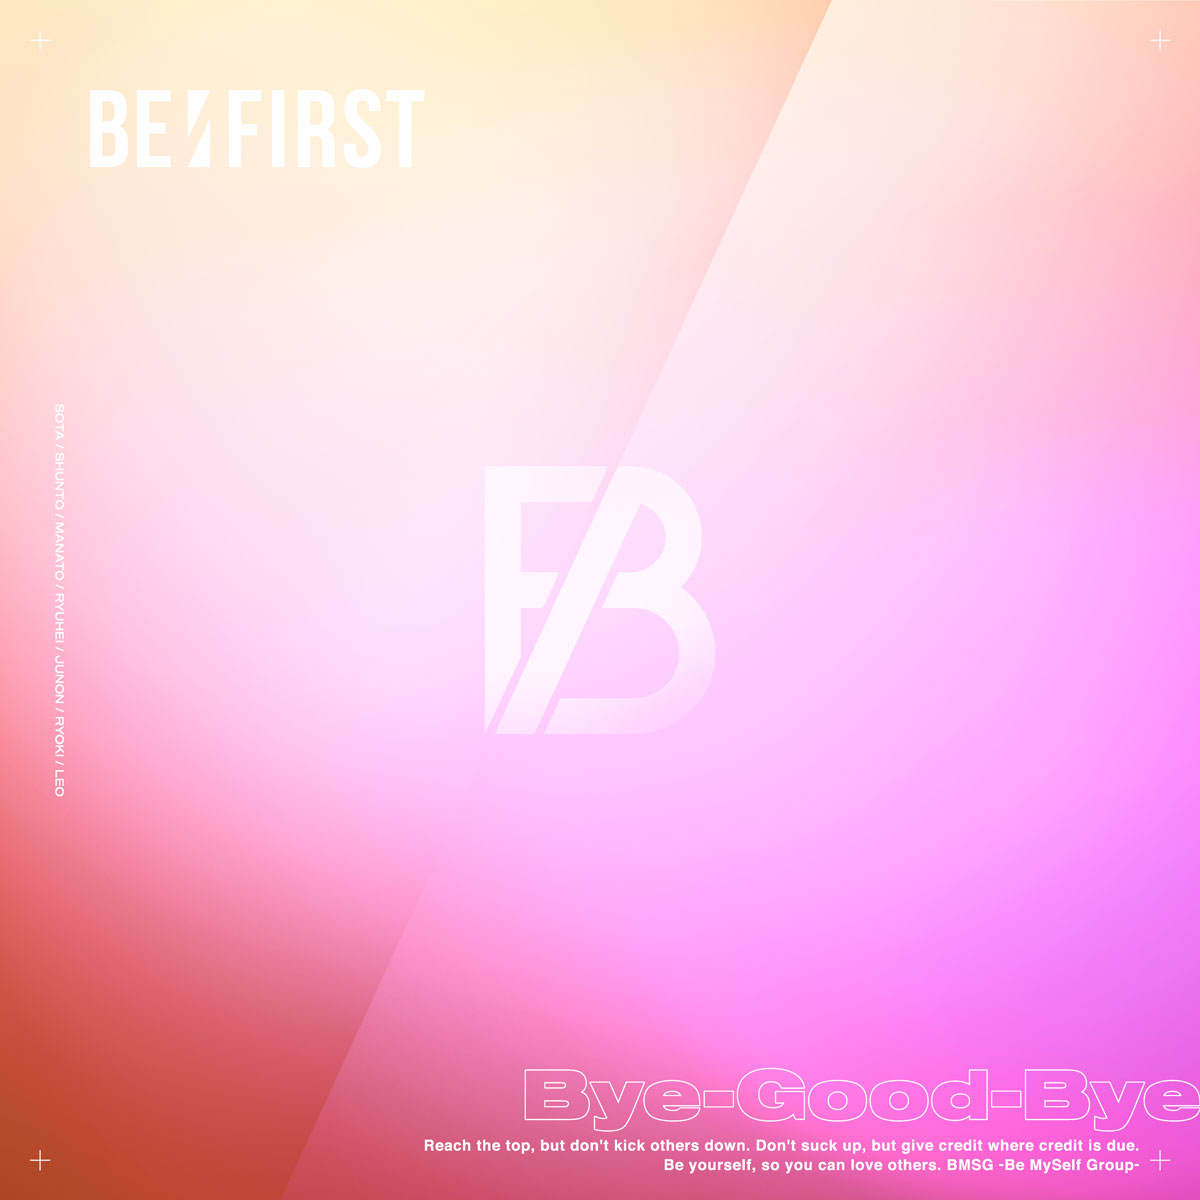 BE:FIRST 2nd Single「Bye-Good-Bye」2022年5月18日Release